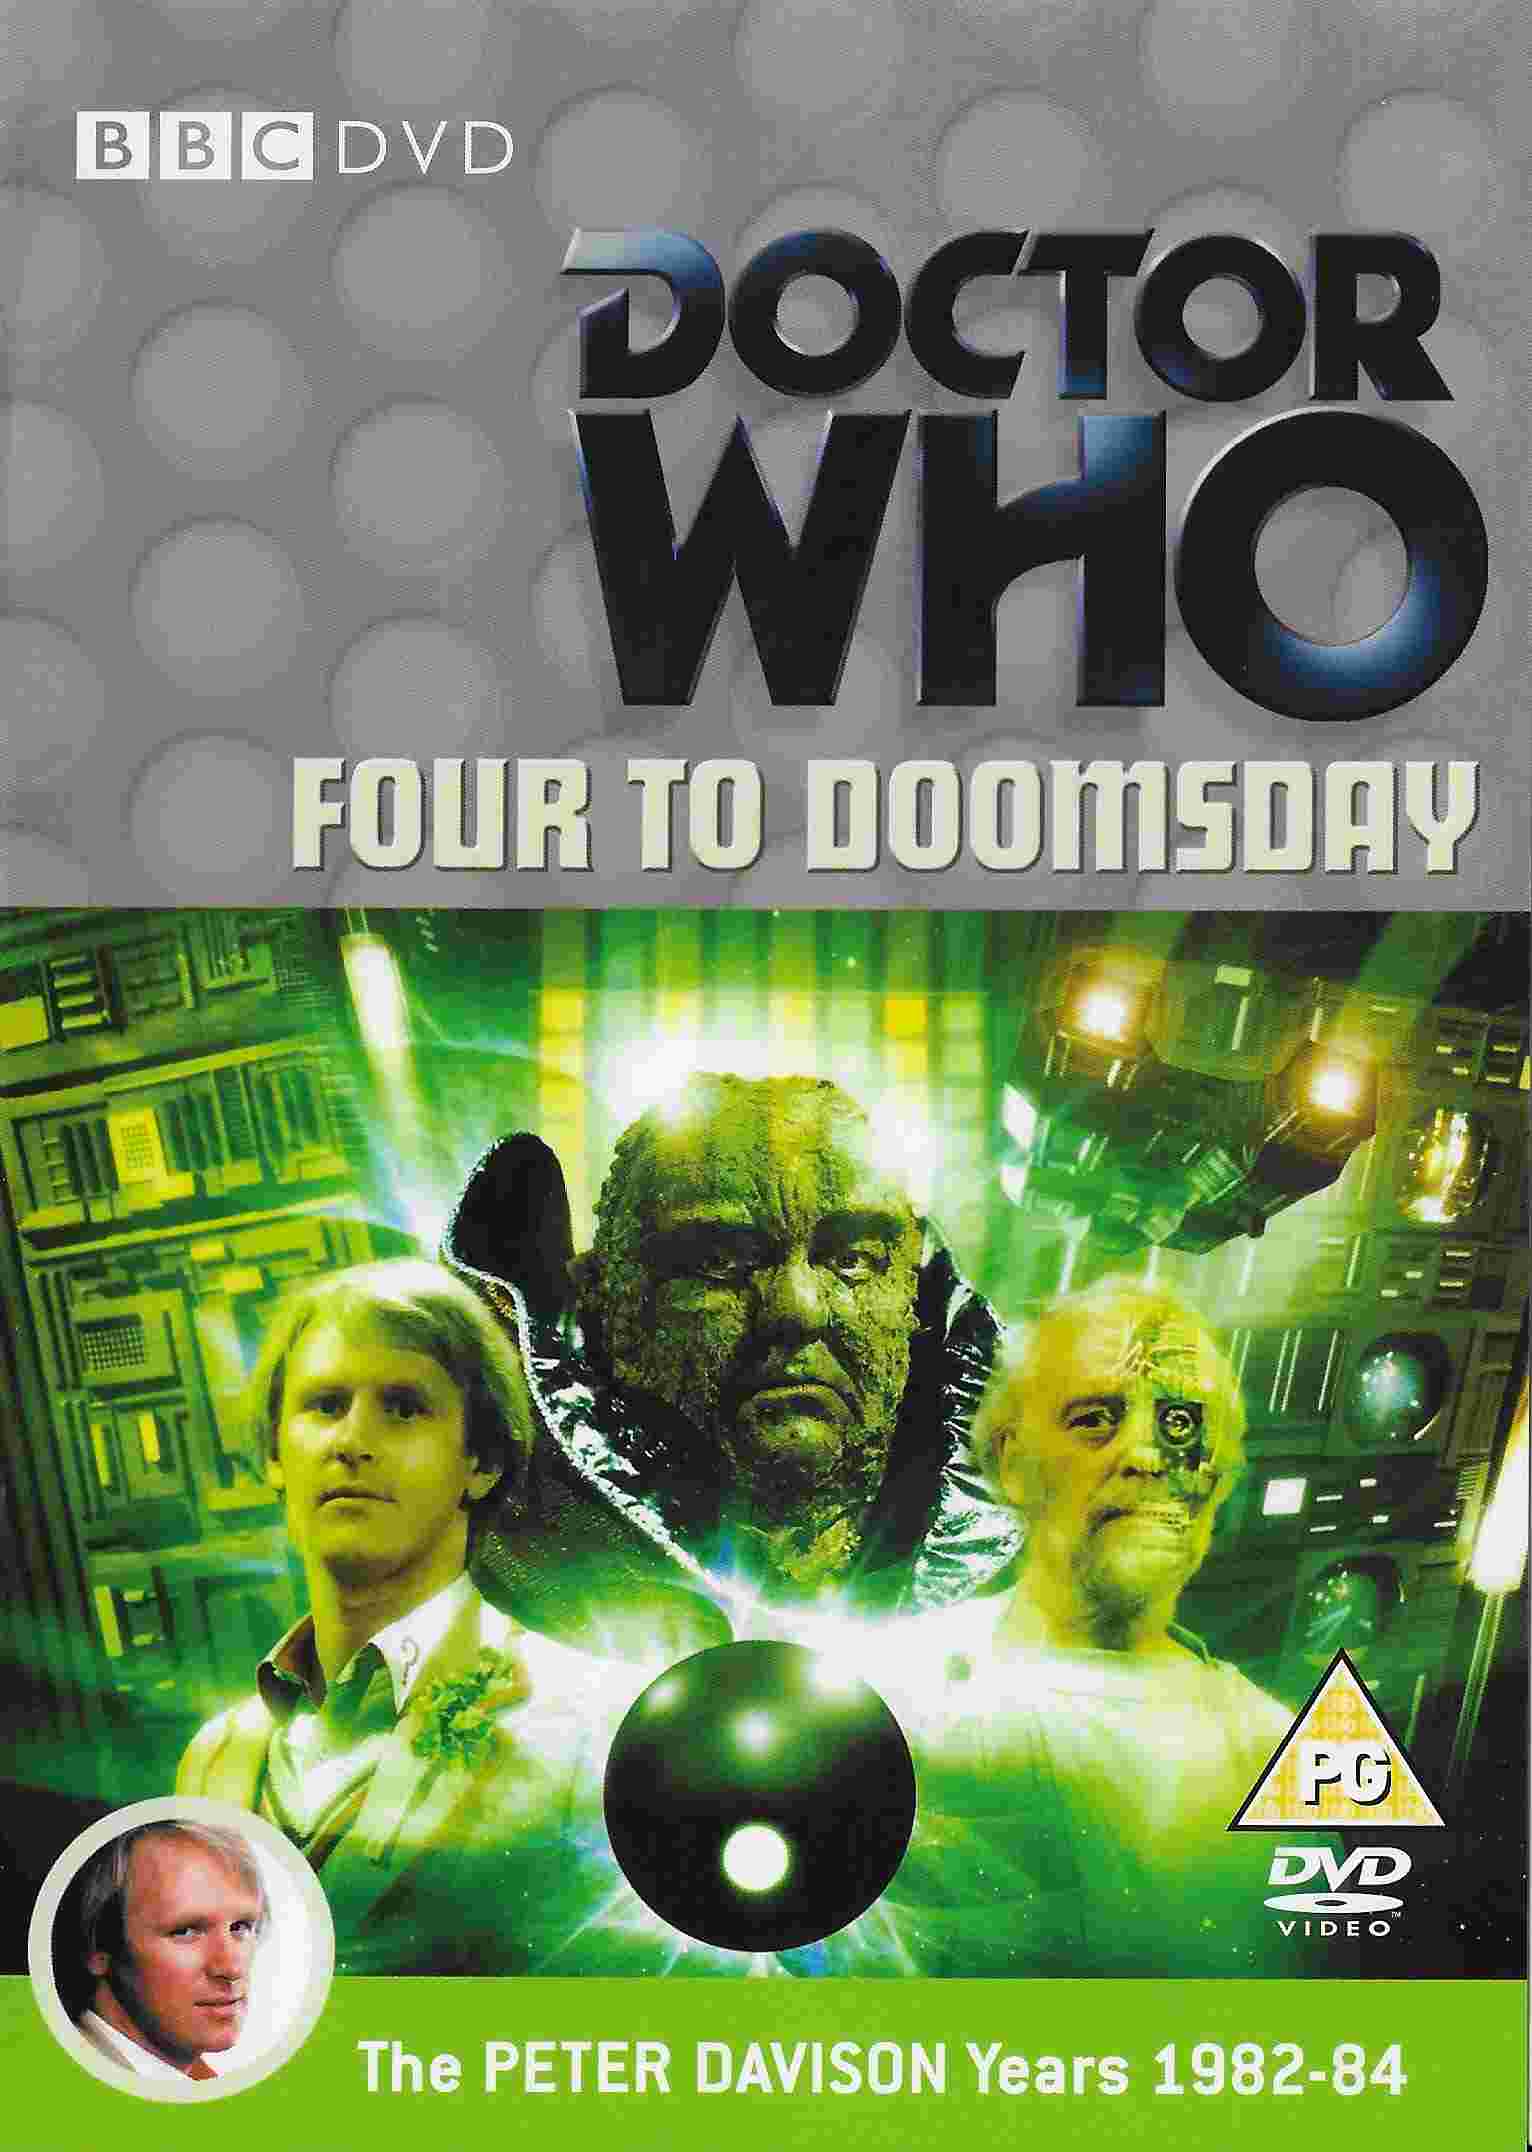 Picture of BBCDVD 2431 Doctor Who - Four to doomsday by artist Terence Dudley from the BBC records and Tapes library